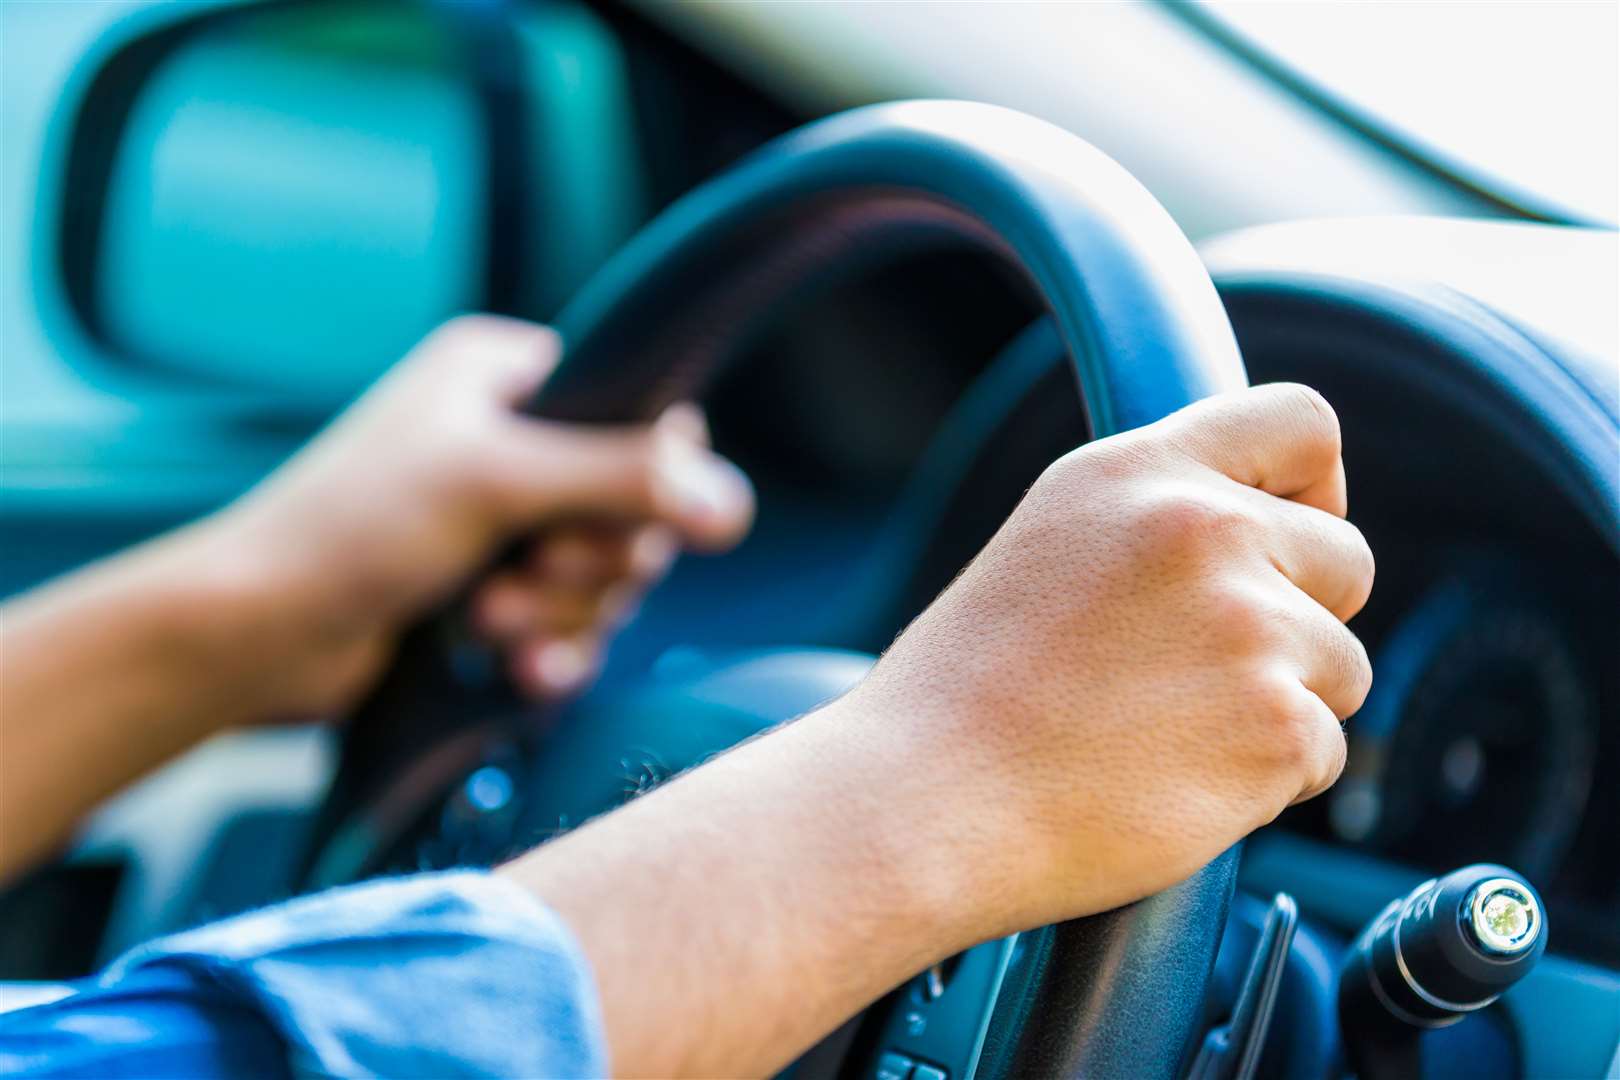 The cost of car insurance has risen by more than £200 in a year. Image: iStock.